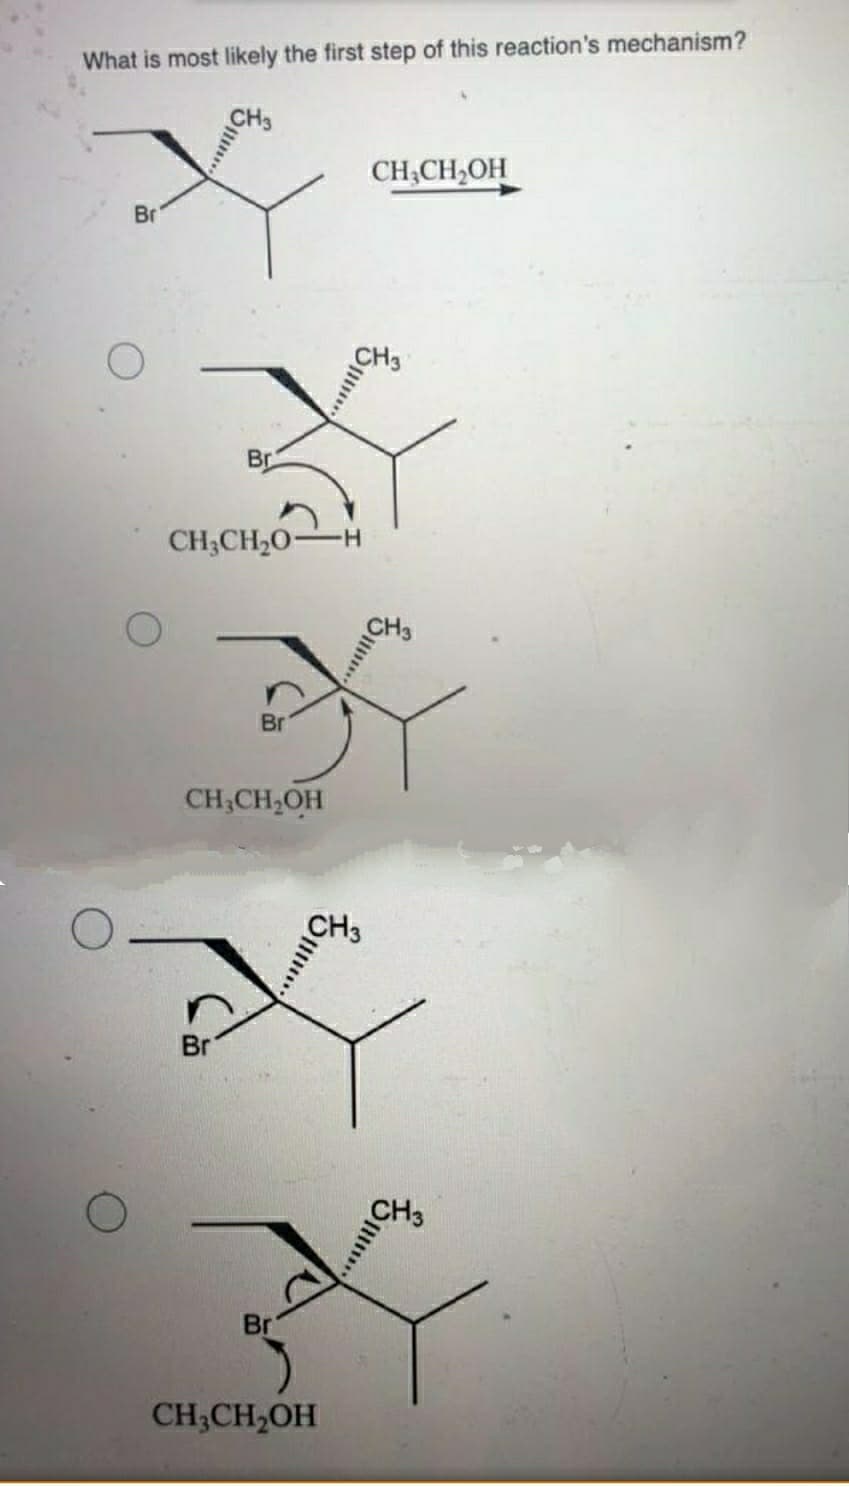 What is most likely the first step of this reaction's mechanism?
CH
CH;CH,OH
Br
CH3
Br
CH;CH2O-
CH3
Br
CH;CH,OH
Br
CH3
Br
CH;CH,OH
